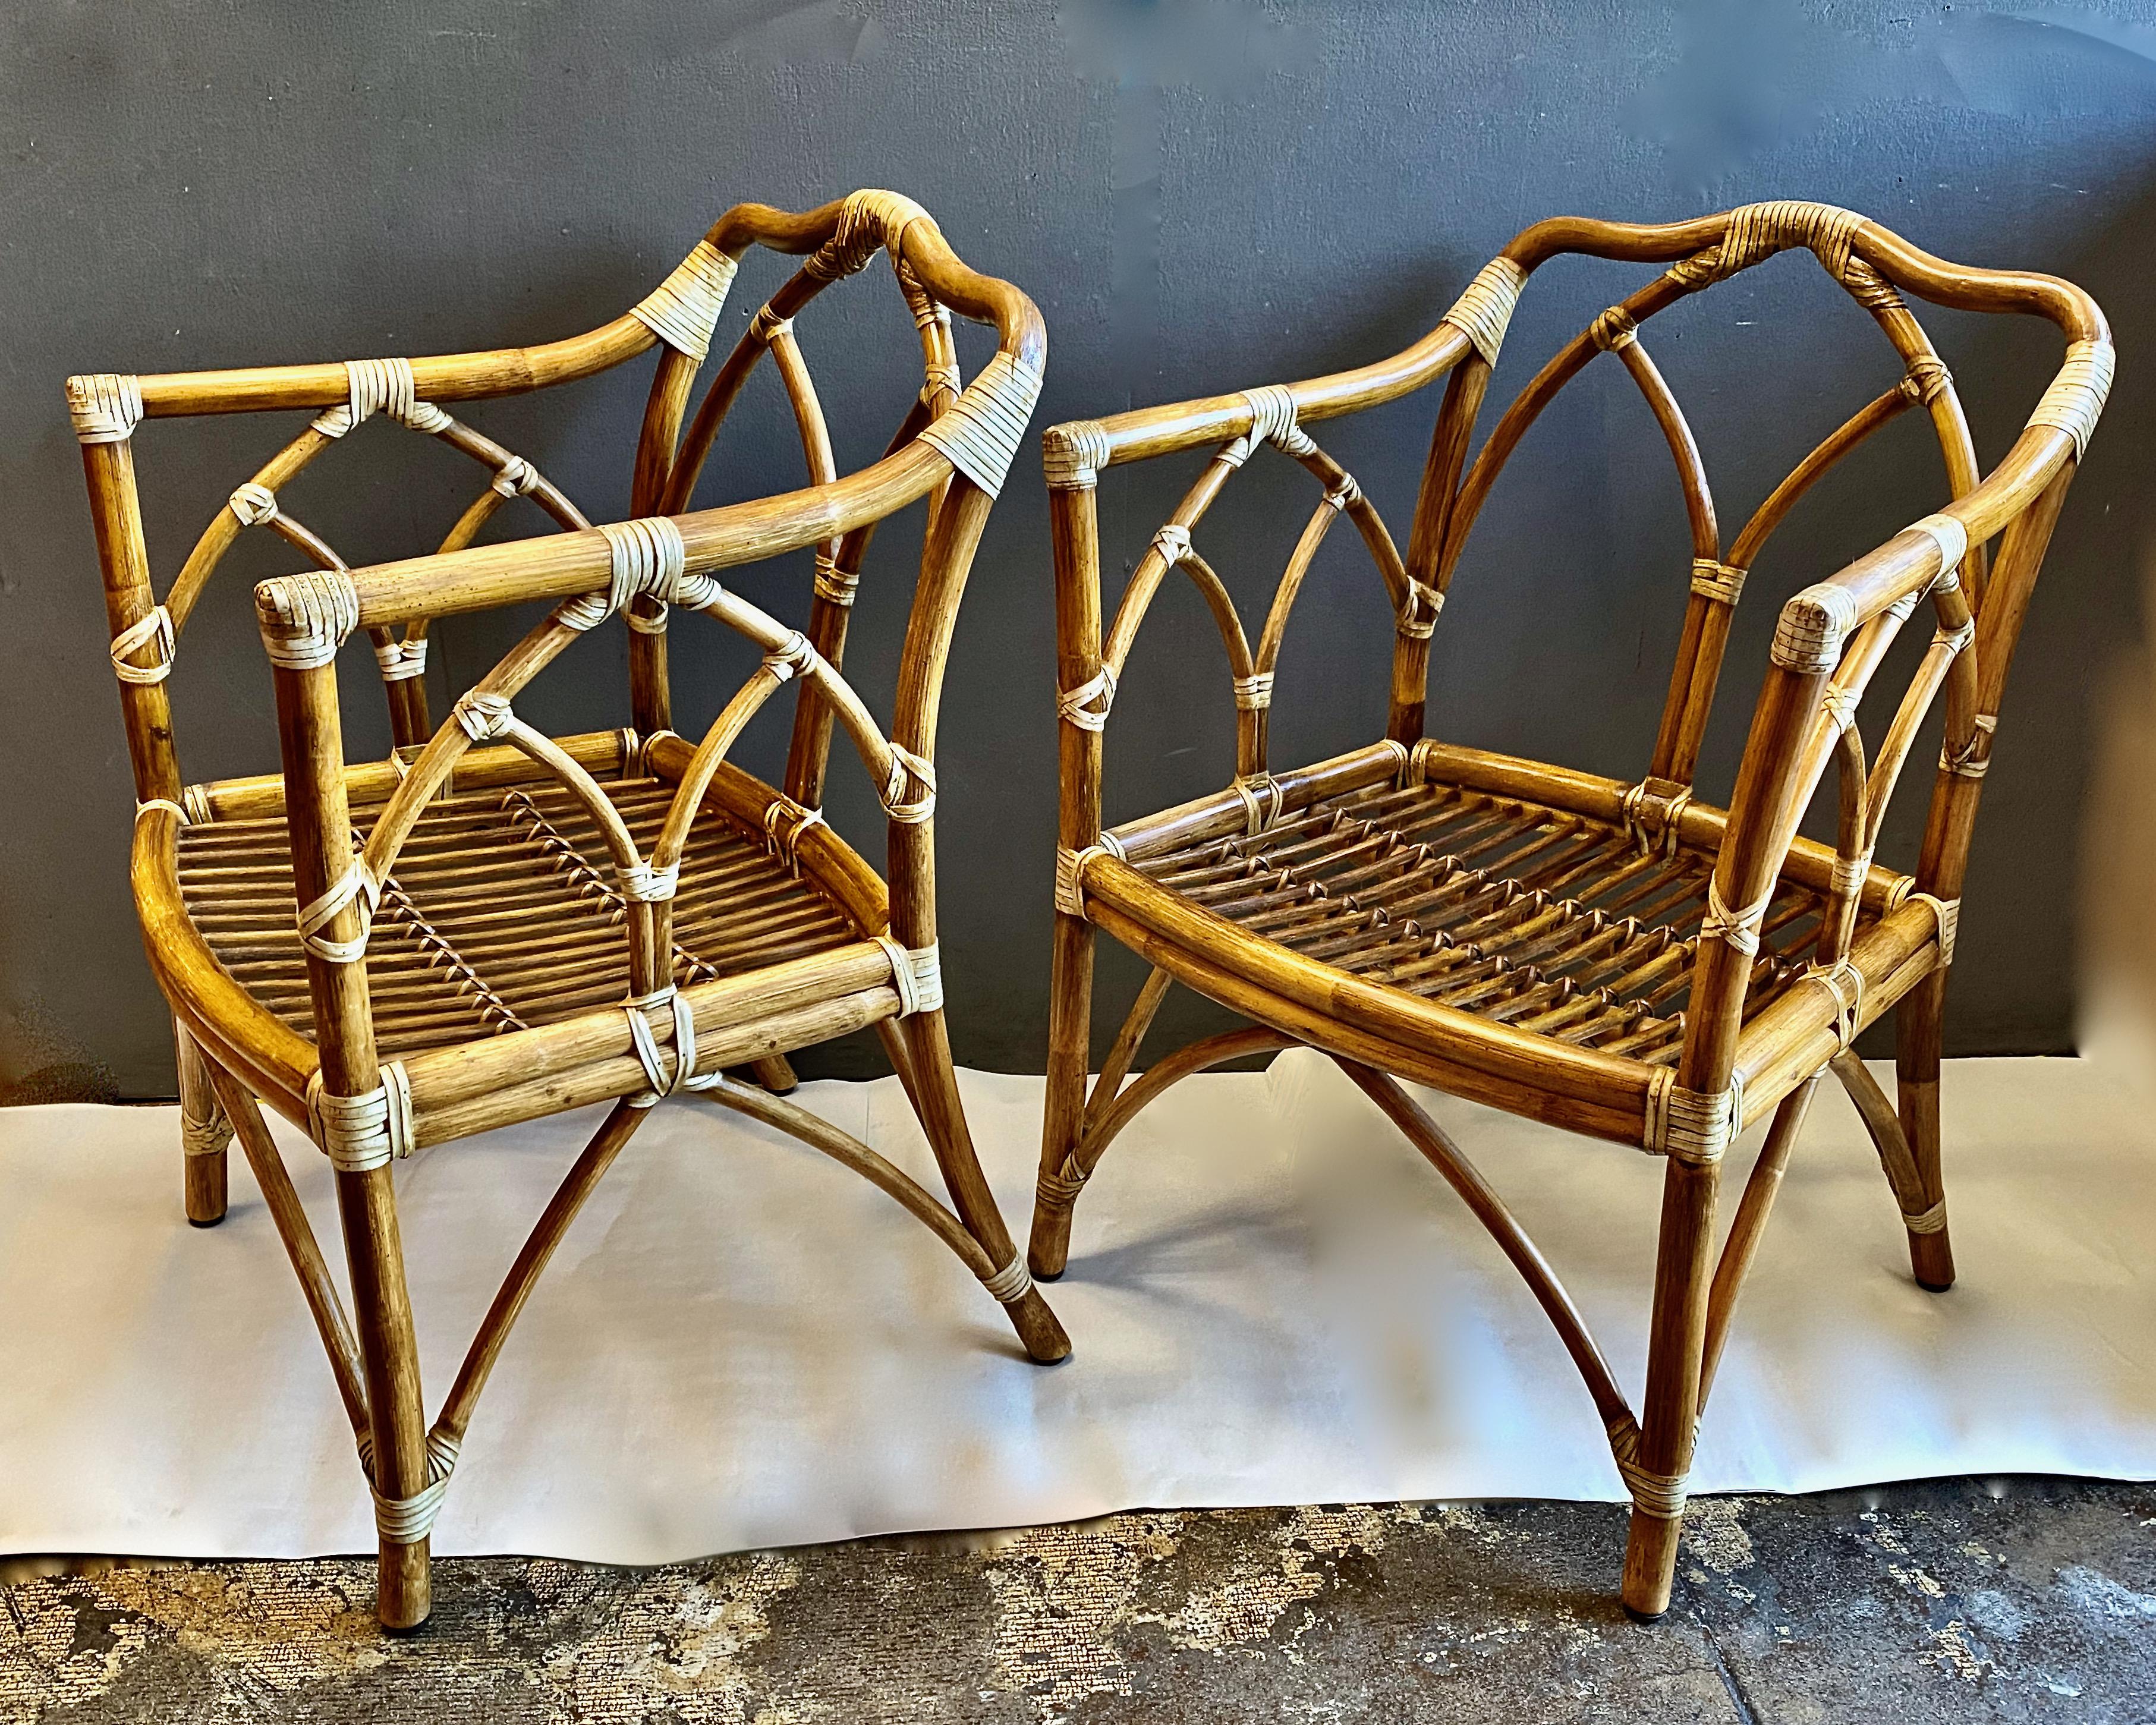 This is a wonderful set of 2 Mcguire Cathedral Lounge chairs. The chairs are in excellent original condition. We have cleaned and waxed the surface of the chairs and given them a very minor touch-up to the highly desirable original surface. The